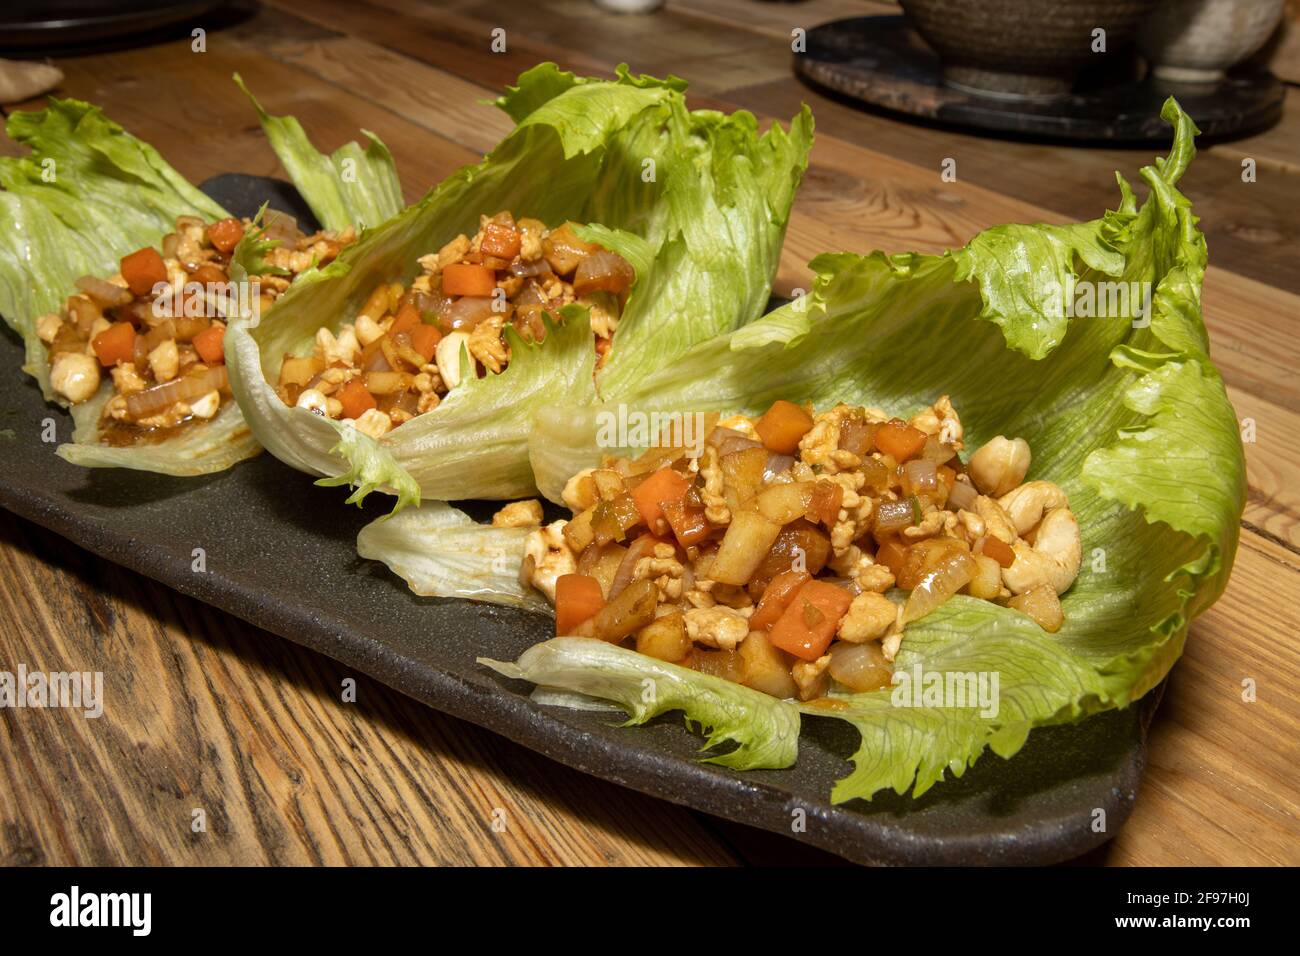 A delicious plate of Chicken Yuk Sung, Chinese Lettuce Wraps with cashew nuts , traditional meal in china Stock Photo